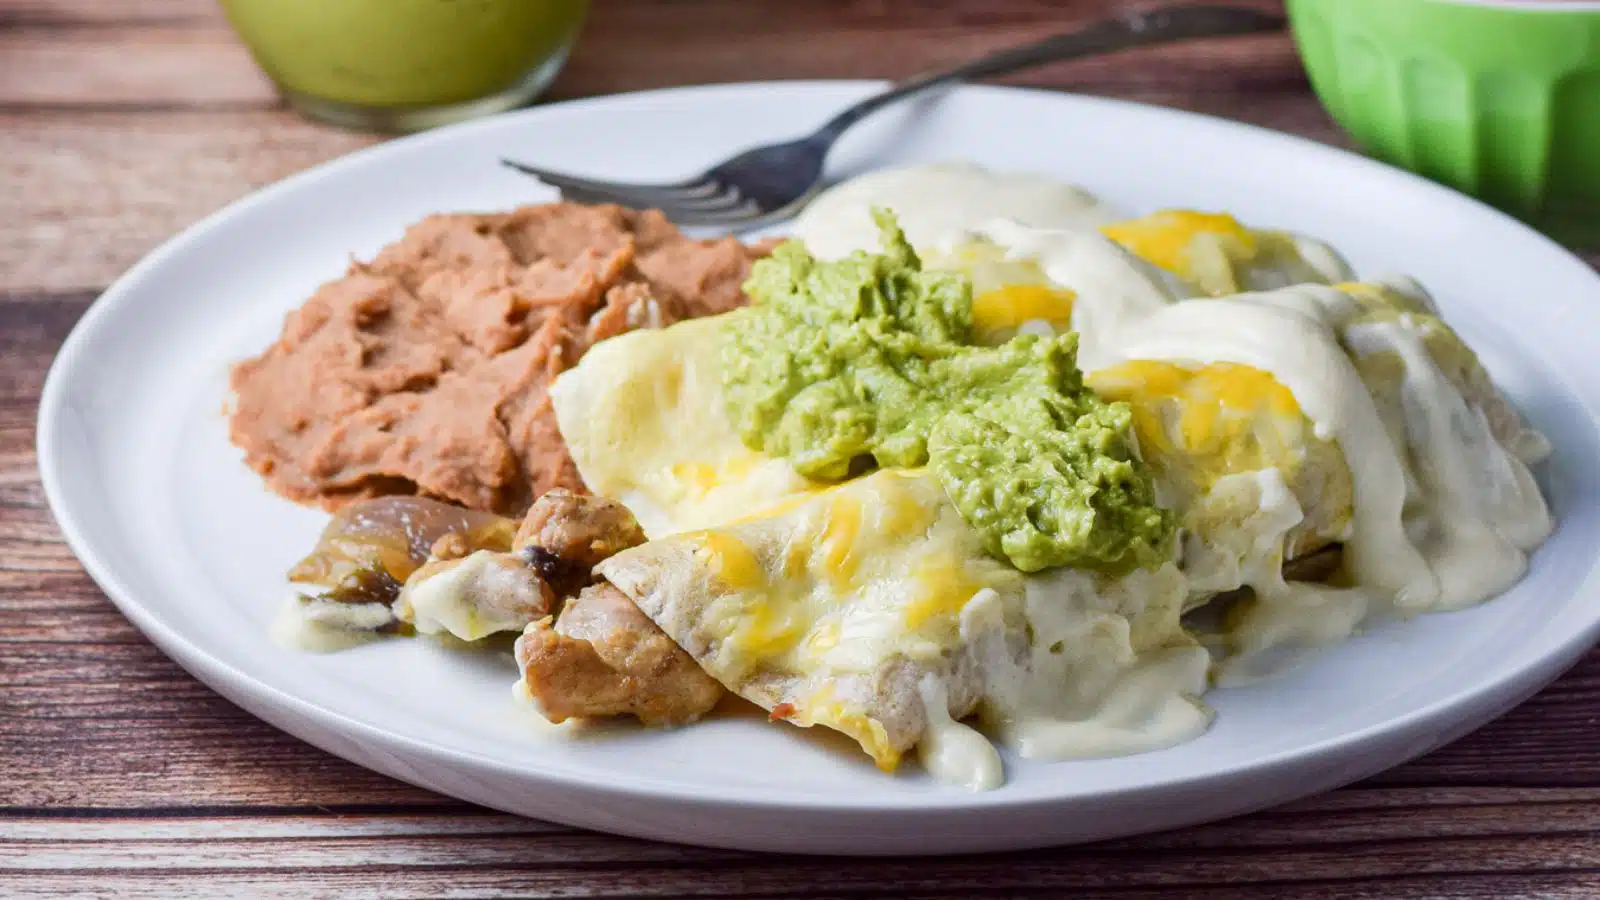 A white plate with two enchiladas with chicken sticking out of it with sauce and guacamole - along with beans on the plate